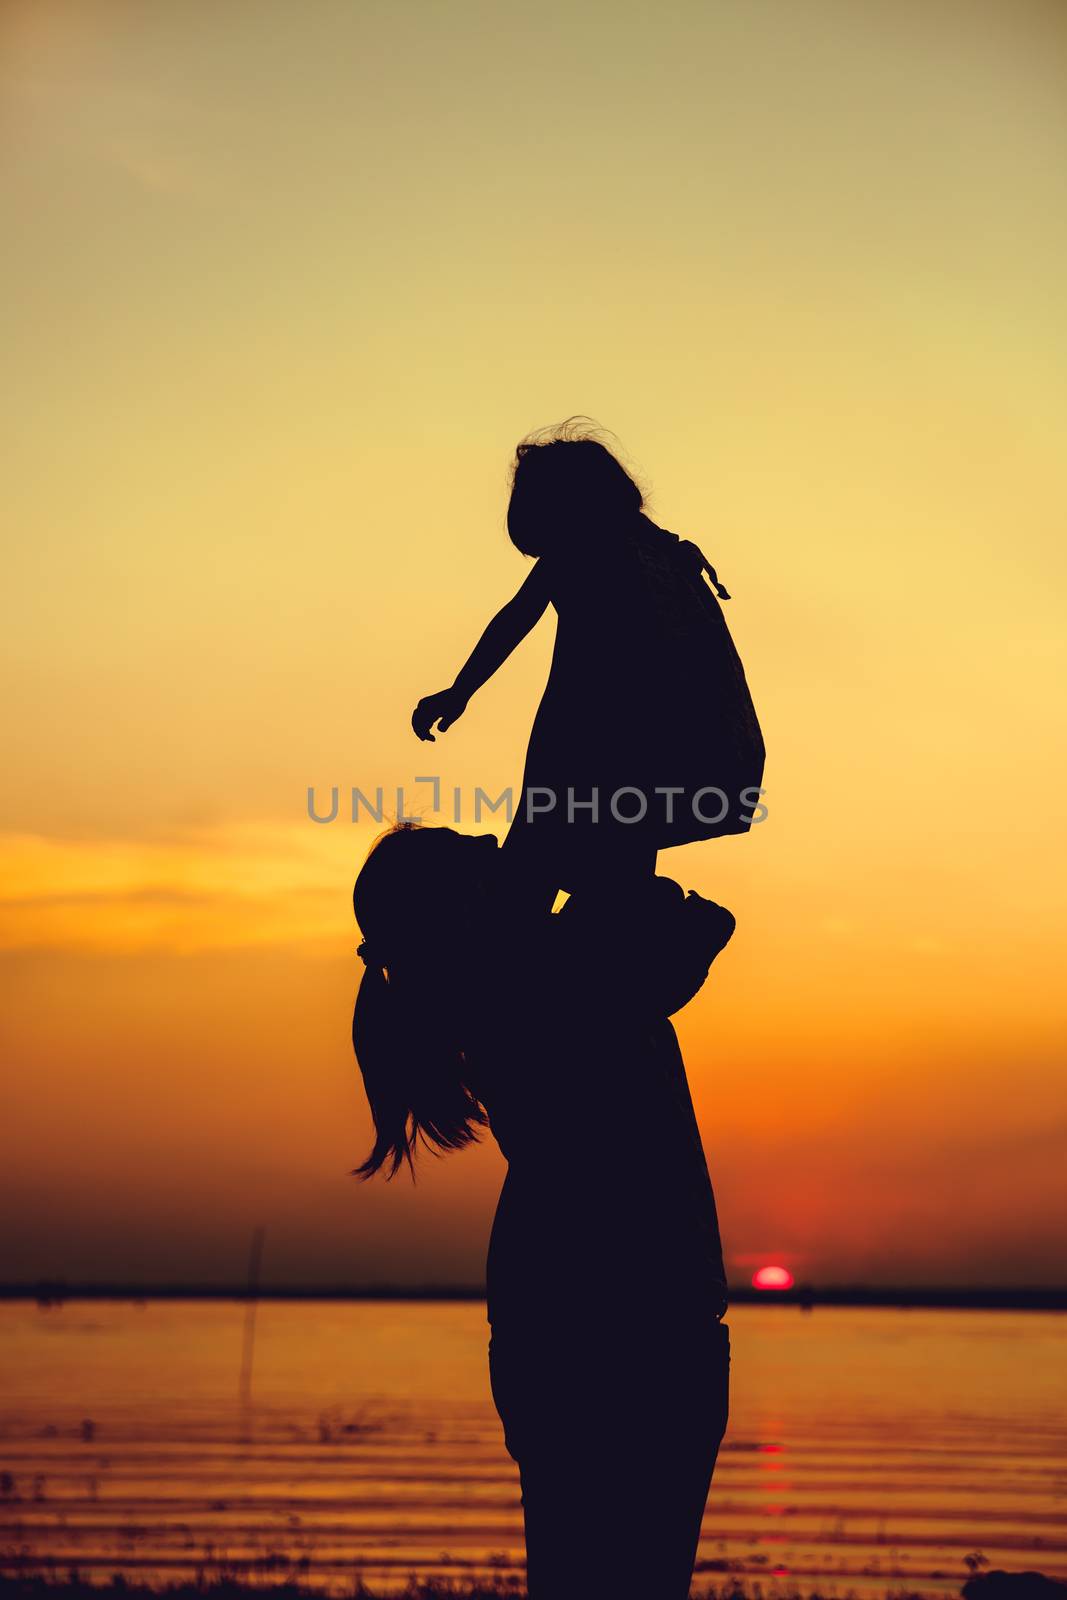 Silhouette of mother and child enjoying the view at riverside. Mother lifting her little girl up in the air on colorful sunset sky background. Friendly family.